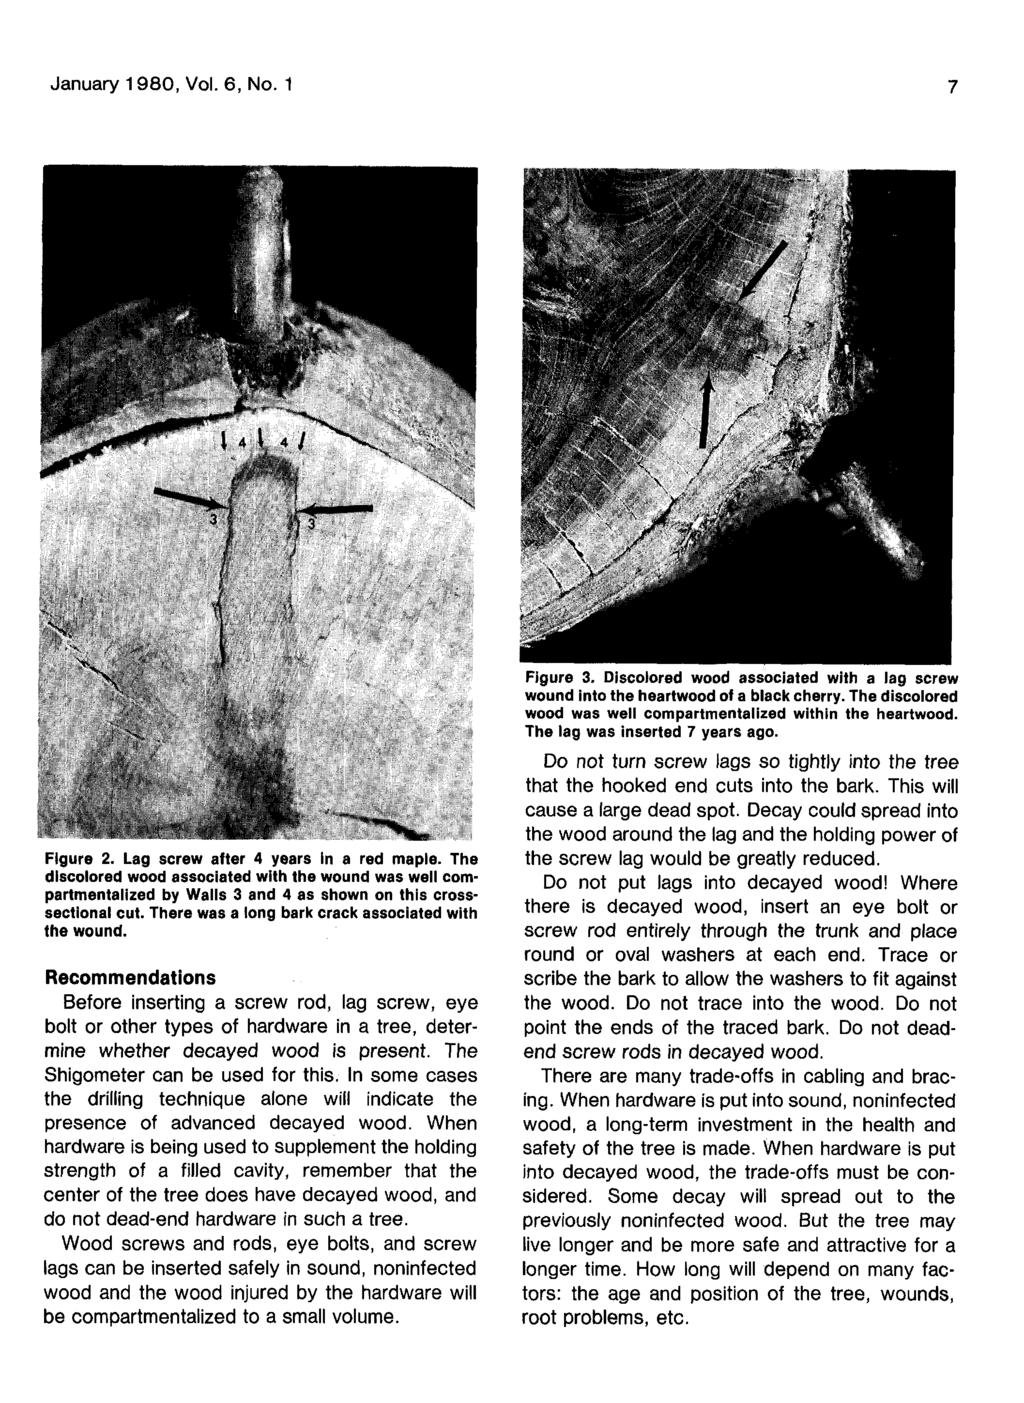 -, ^T" Figure 2. Lag screw after 4 years in a red maple. The discolored wood associated with the wound was well compartmentalized by Walls 3 and 4 as shown on this crosssectional cut.